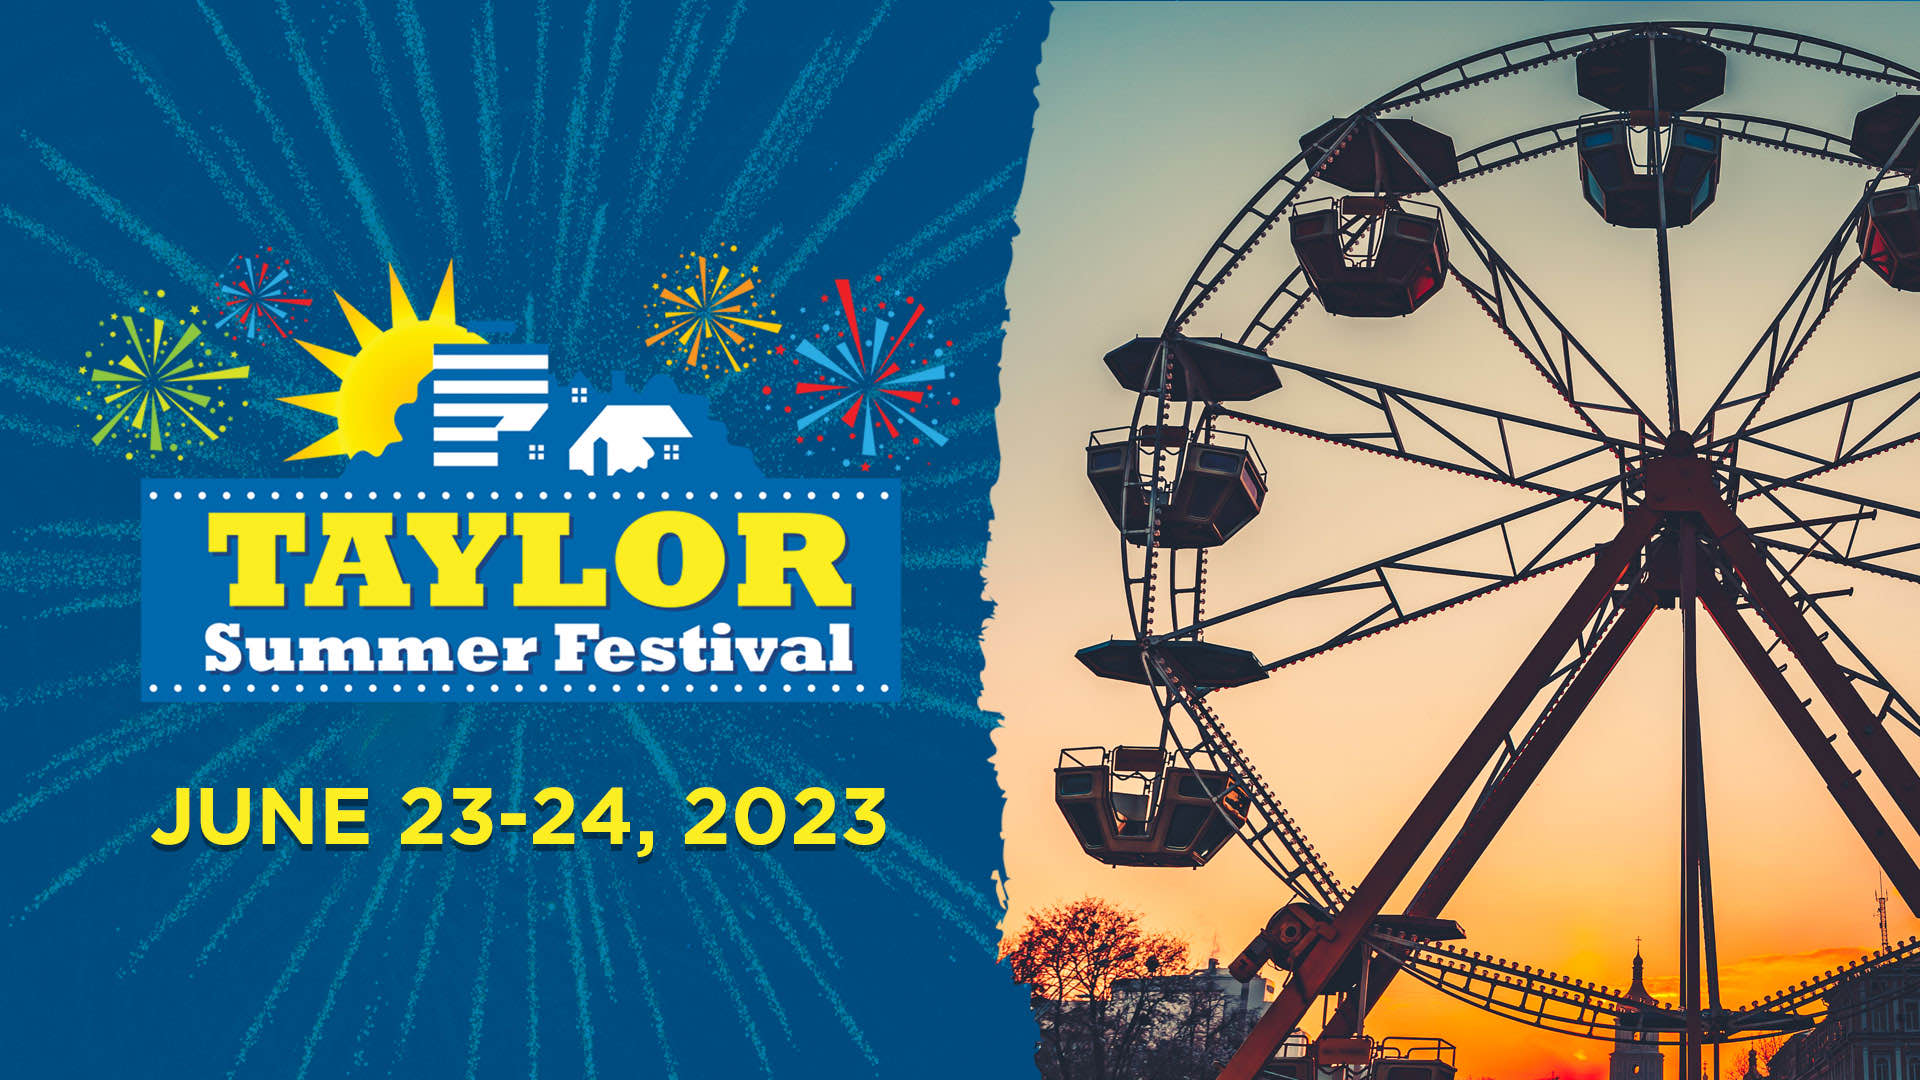 Taylor Summer Festival June 23-24, 2023 with image of a ferris wheel at sunset